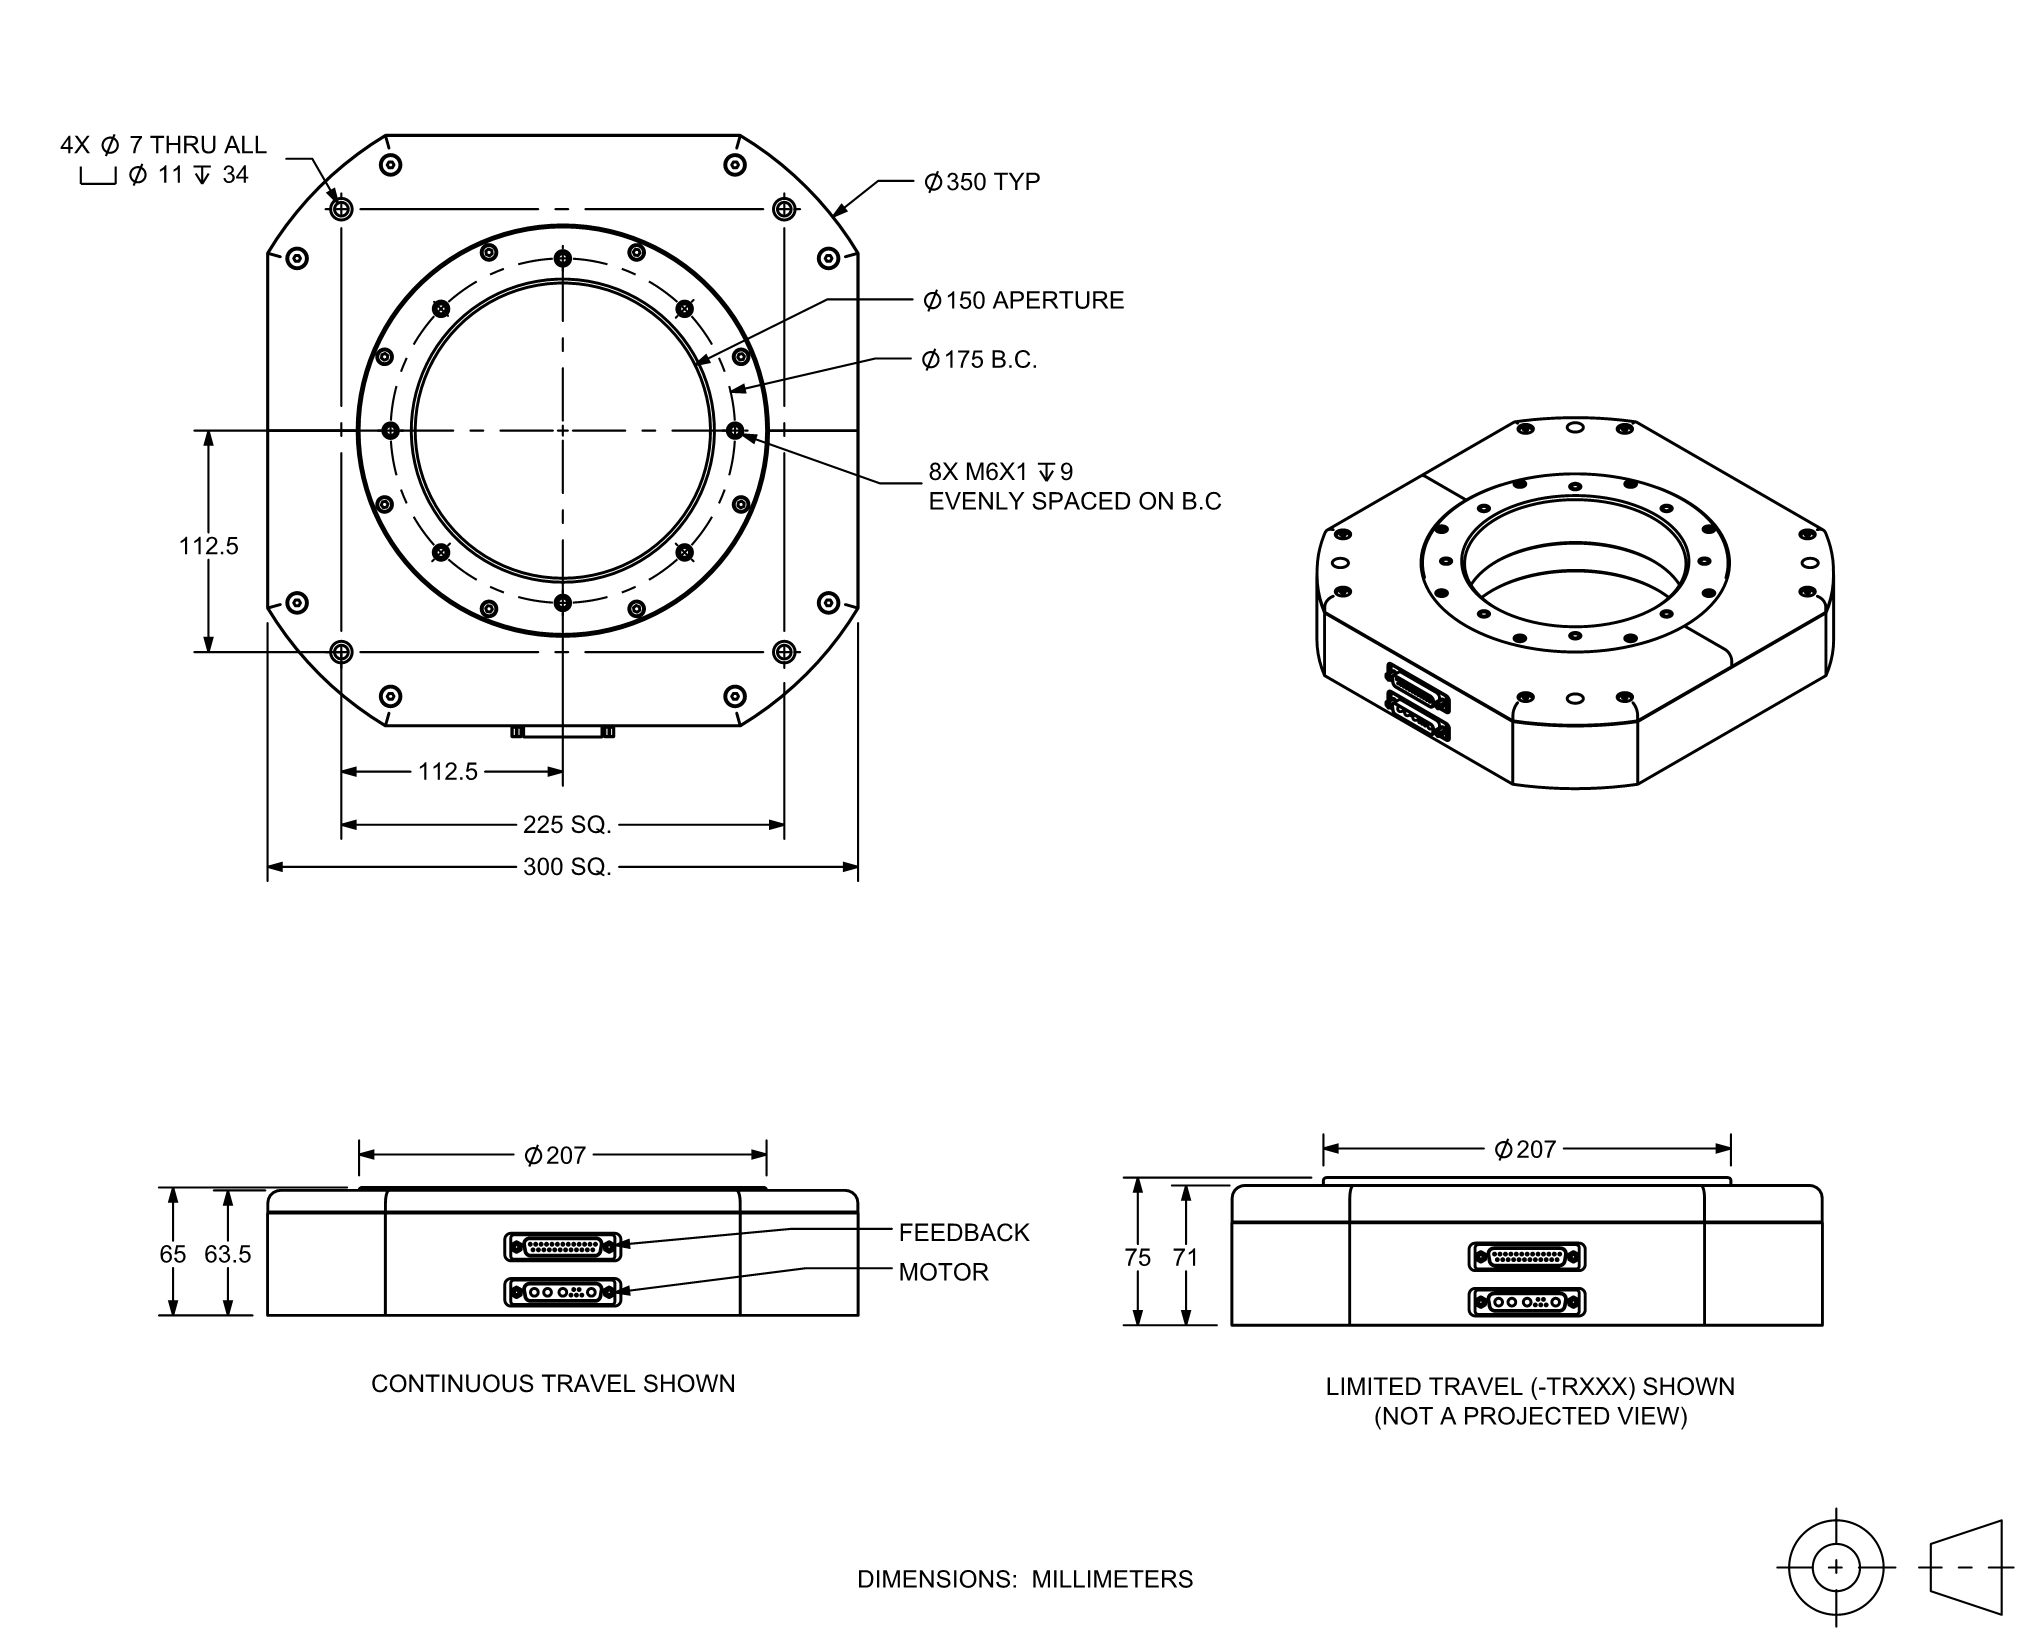 Details about   Aerotech Inc Direct Drive Large Aperture Rotary Stage Unit Model ALAR-150 